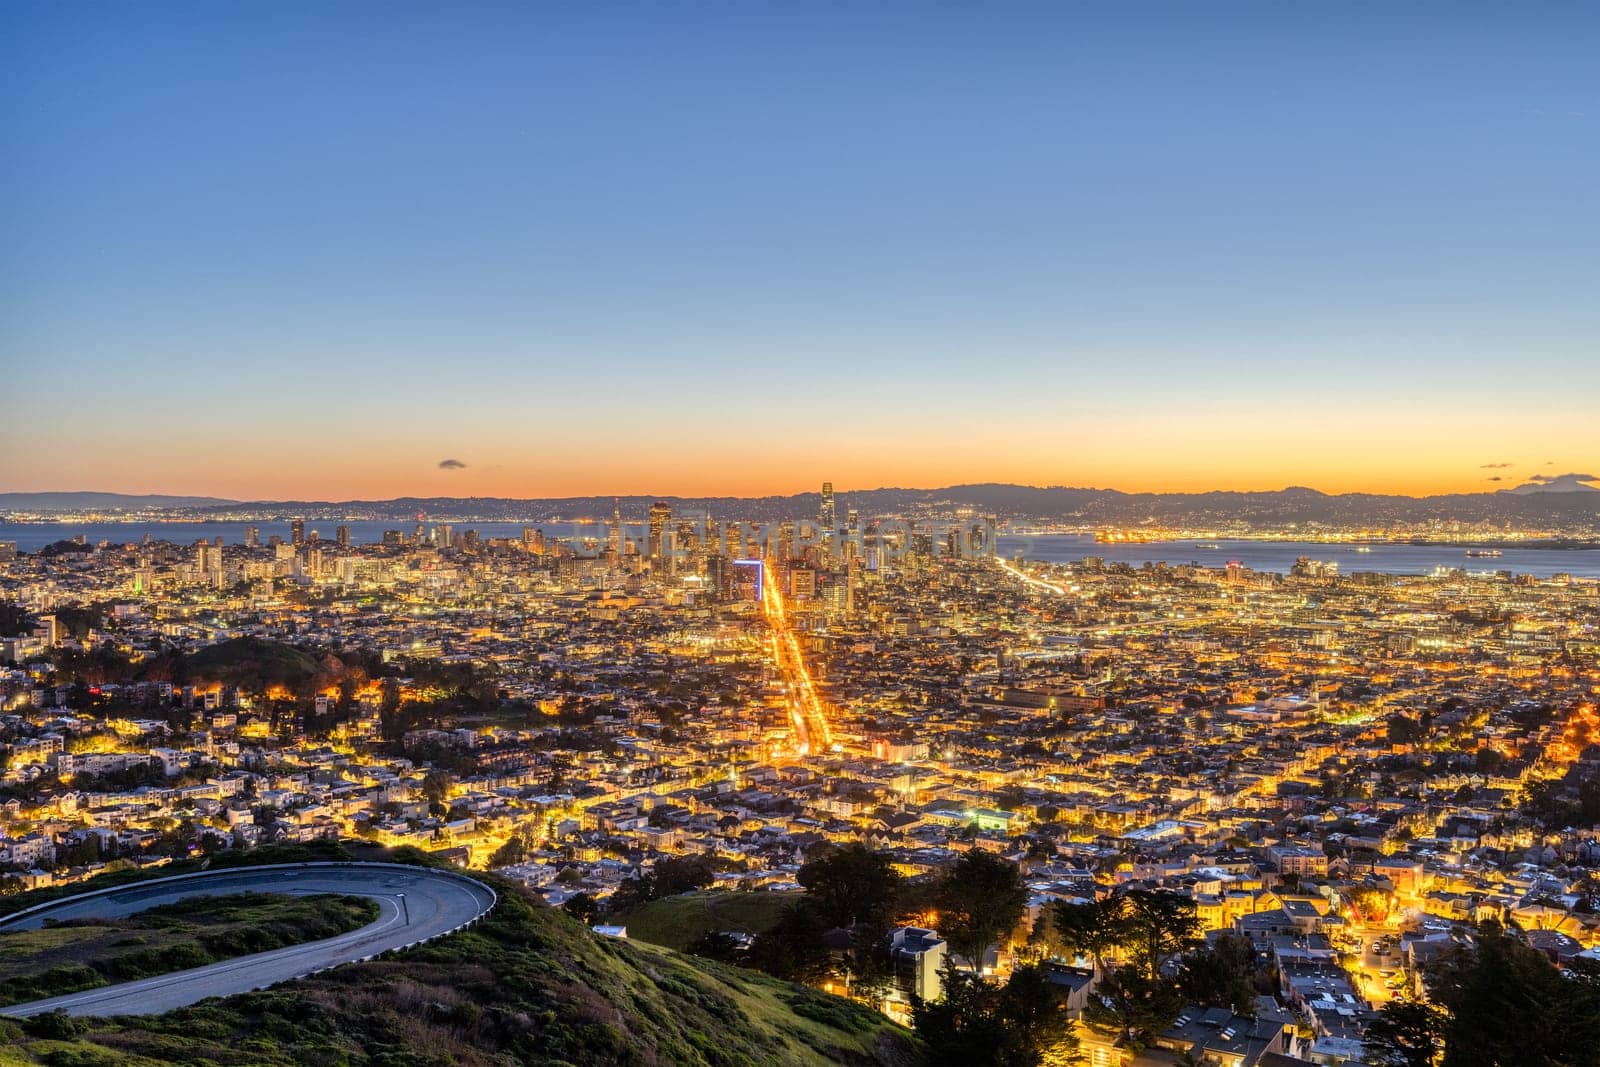 View over downtown San Francisco in California before sunrise